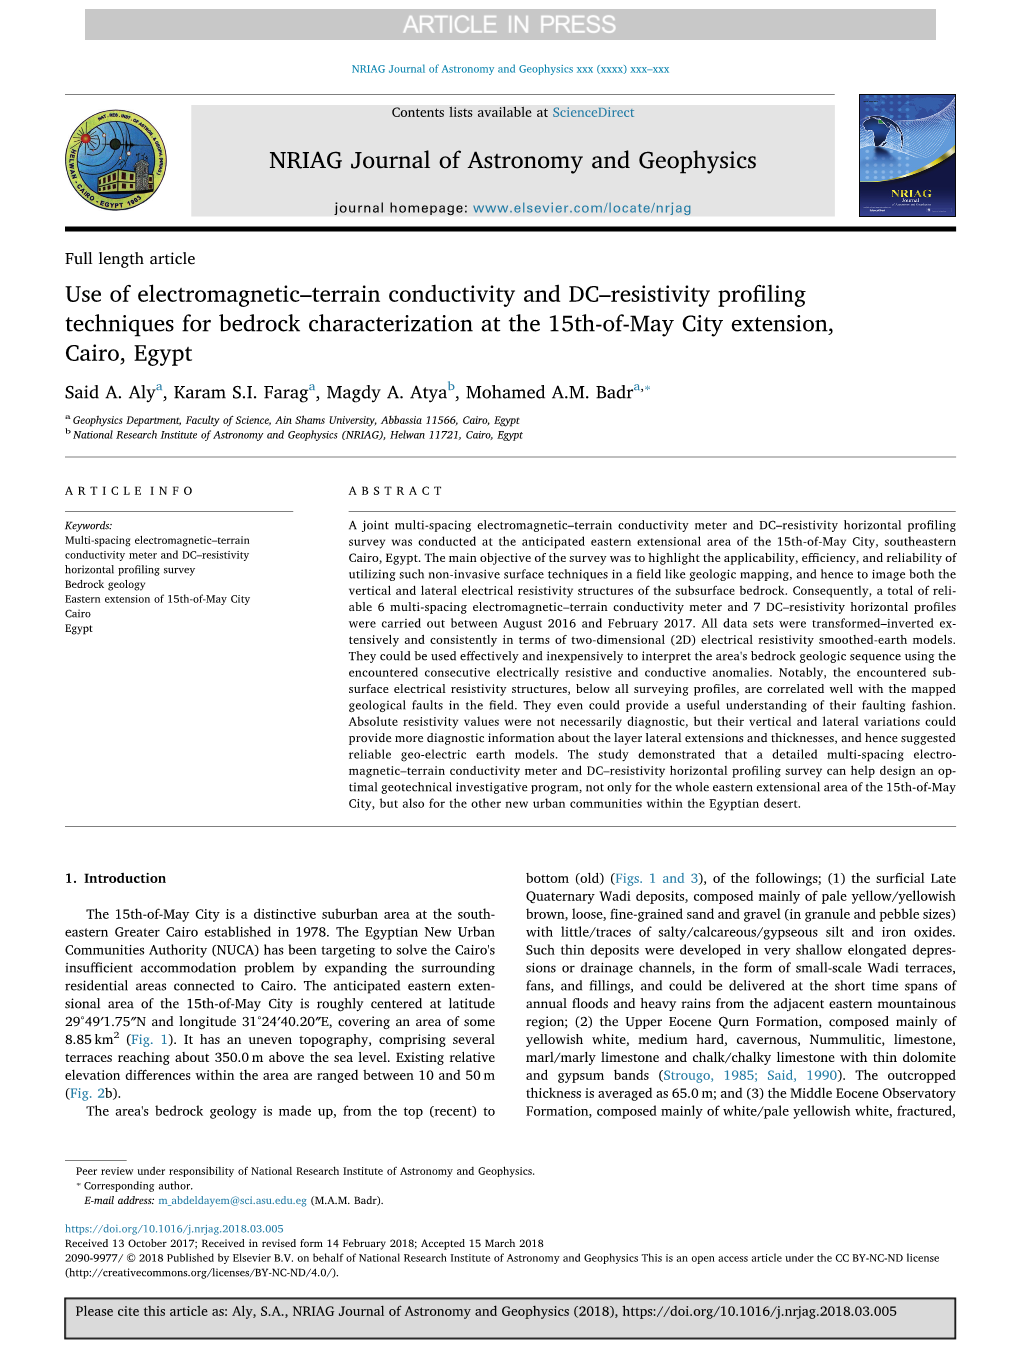 Use of Electromagnetic-Terrain Conductivity and DC-Resistivity